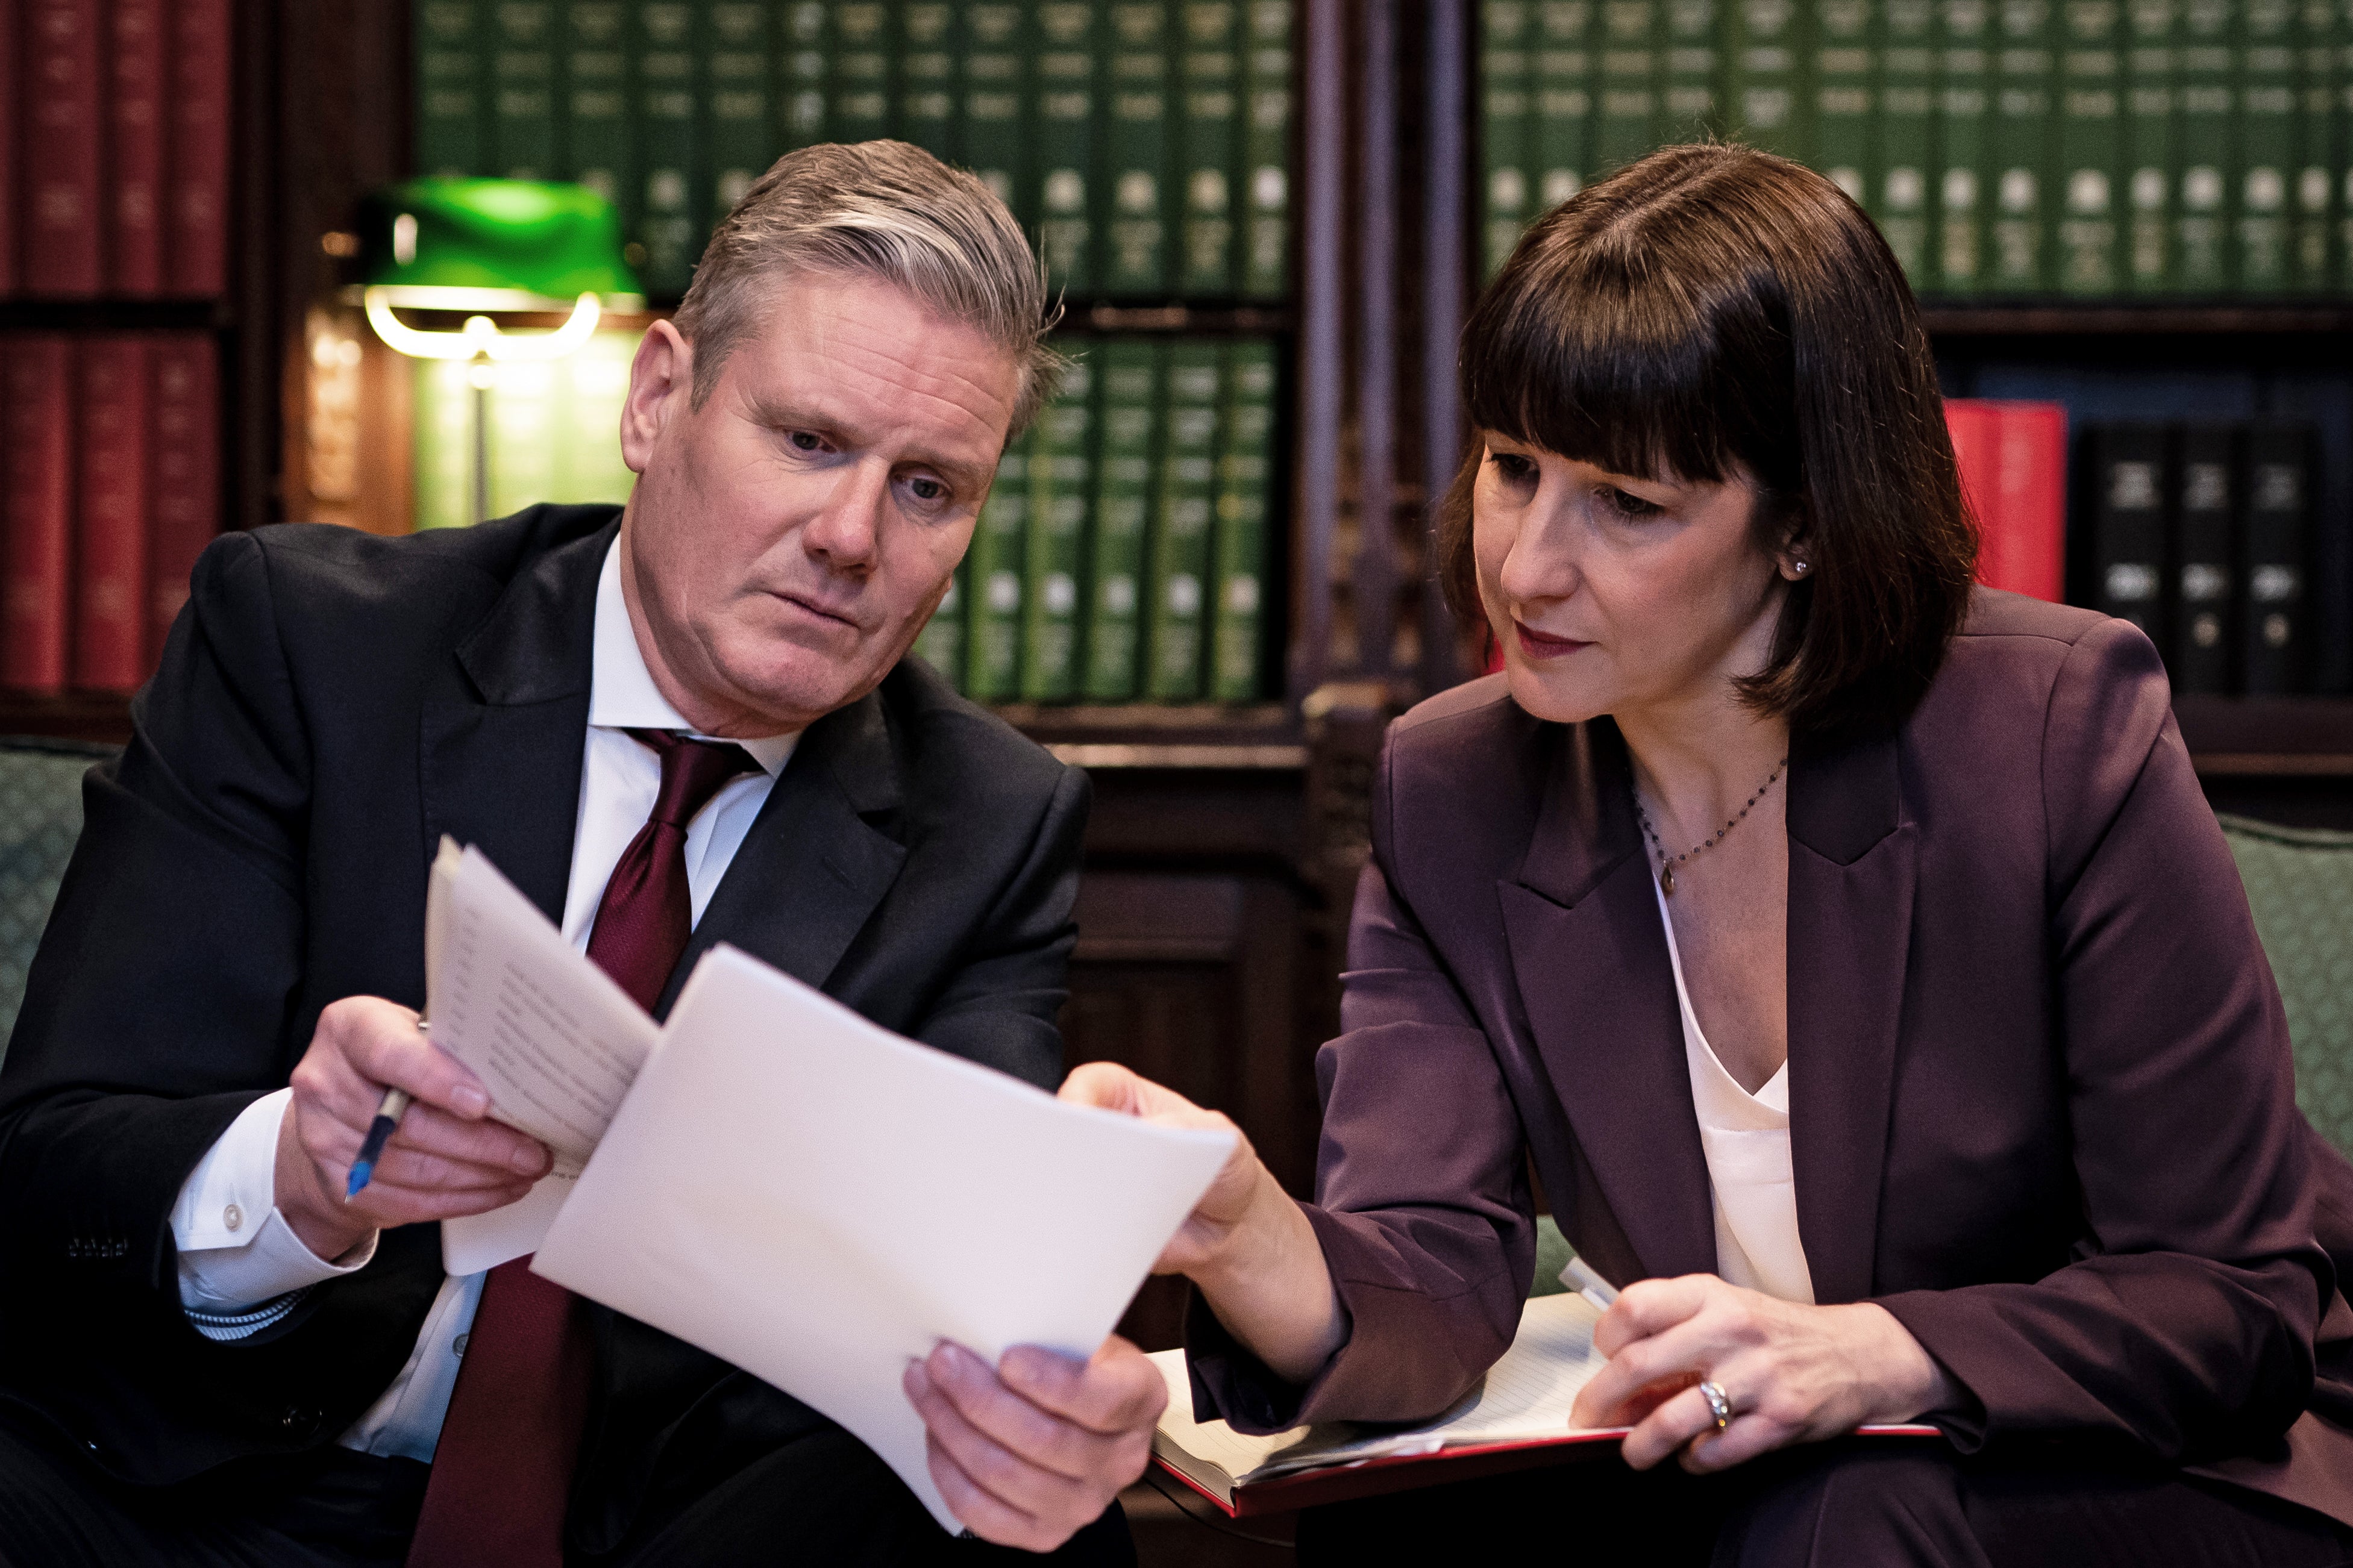 Keir Starmer and his shadow chancellor, Rachel Reeves, will have to find new revenue streams to fund their election pledges